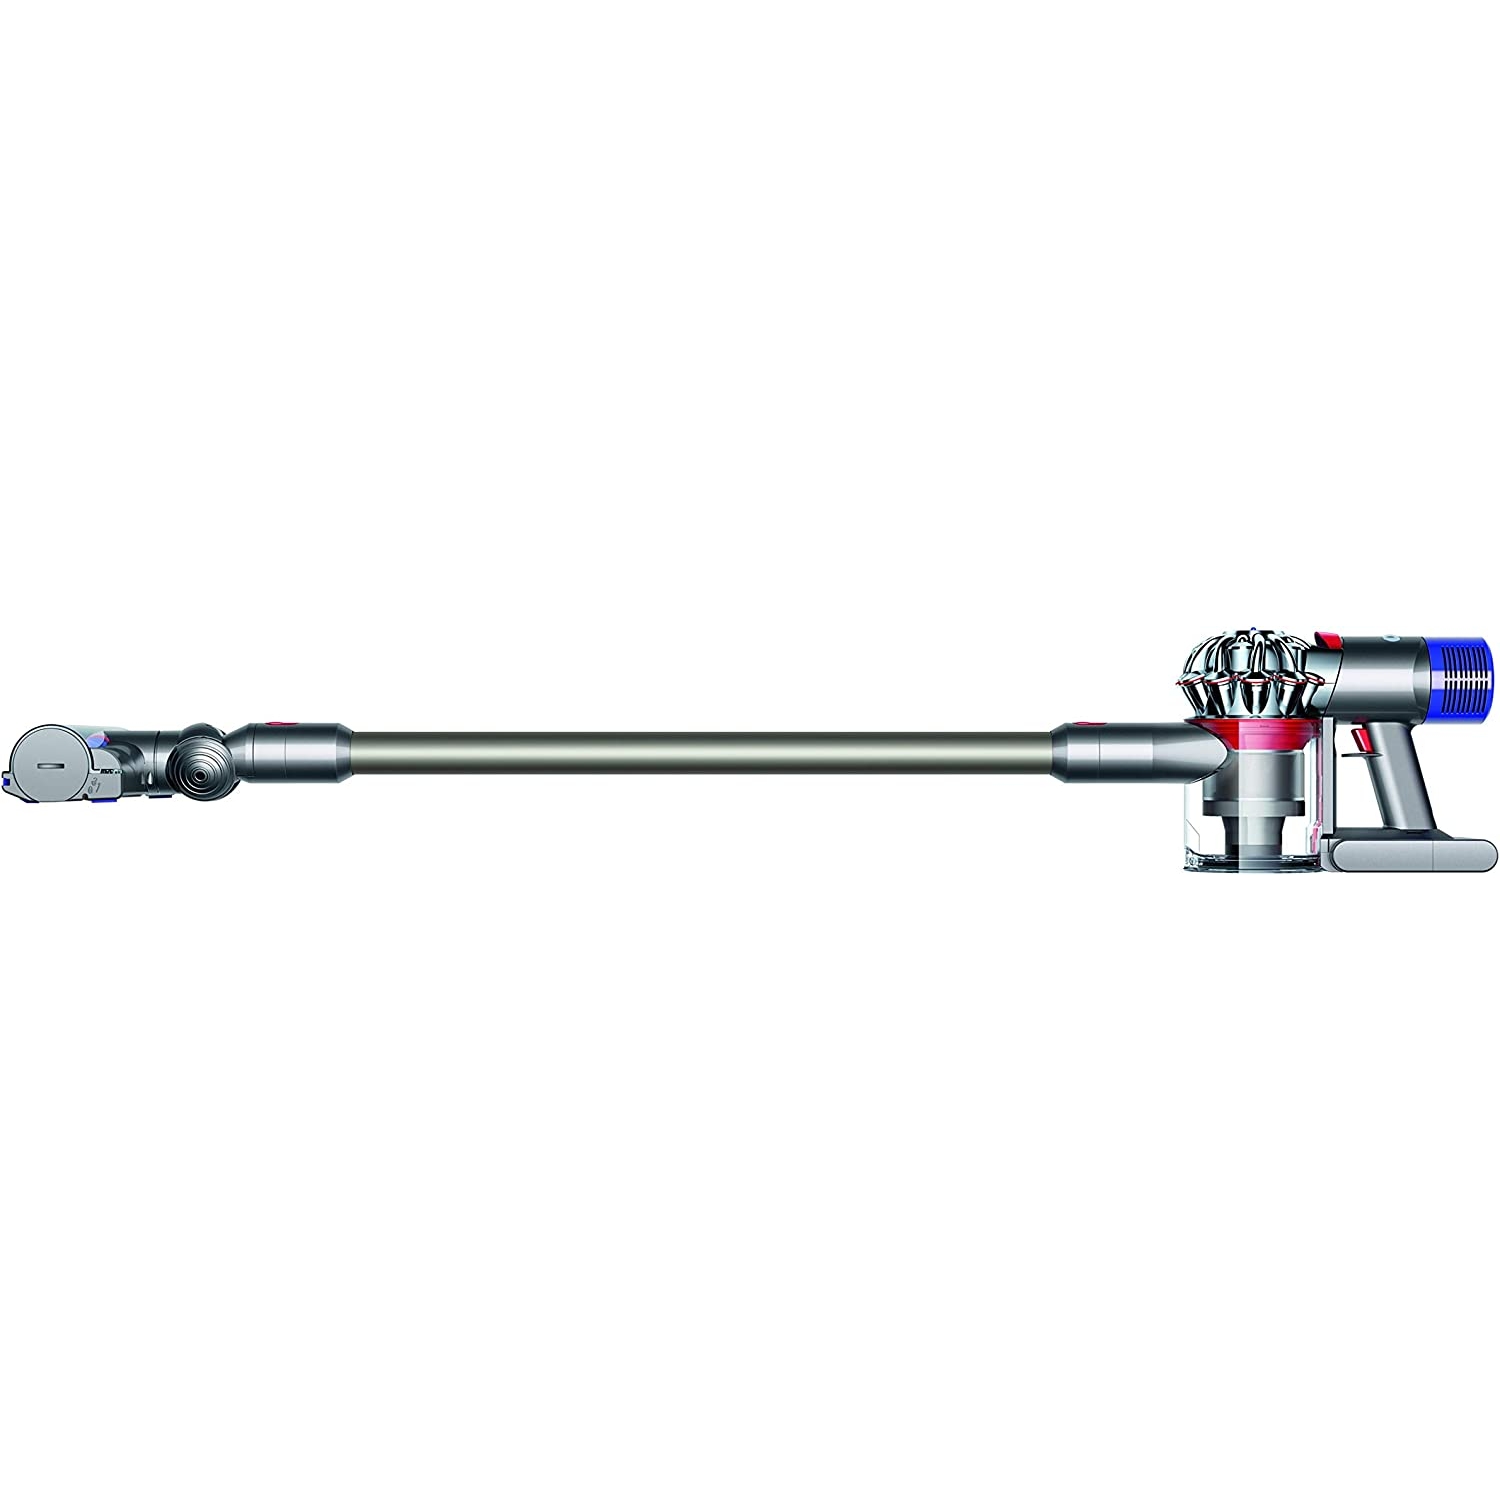 Dyson V8 Animal Cordless Vacuum Cleaner - Hurrells Electrical